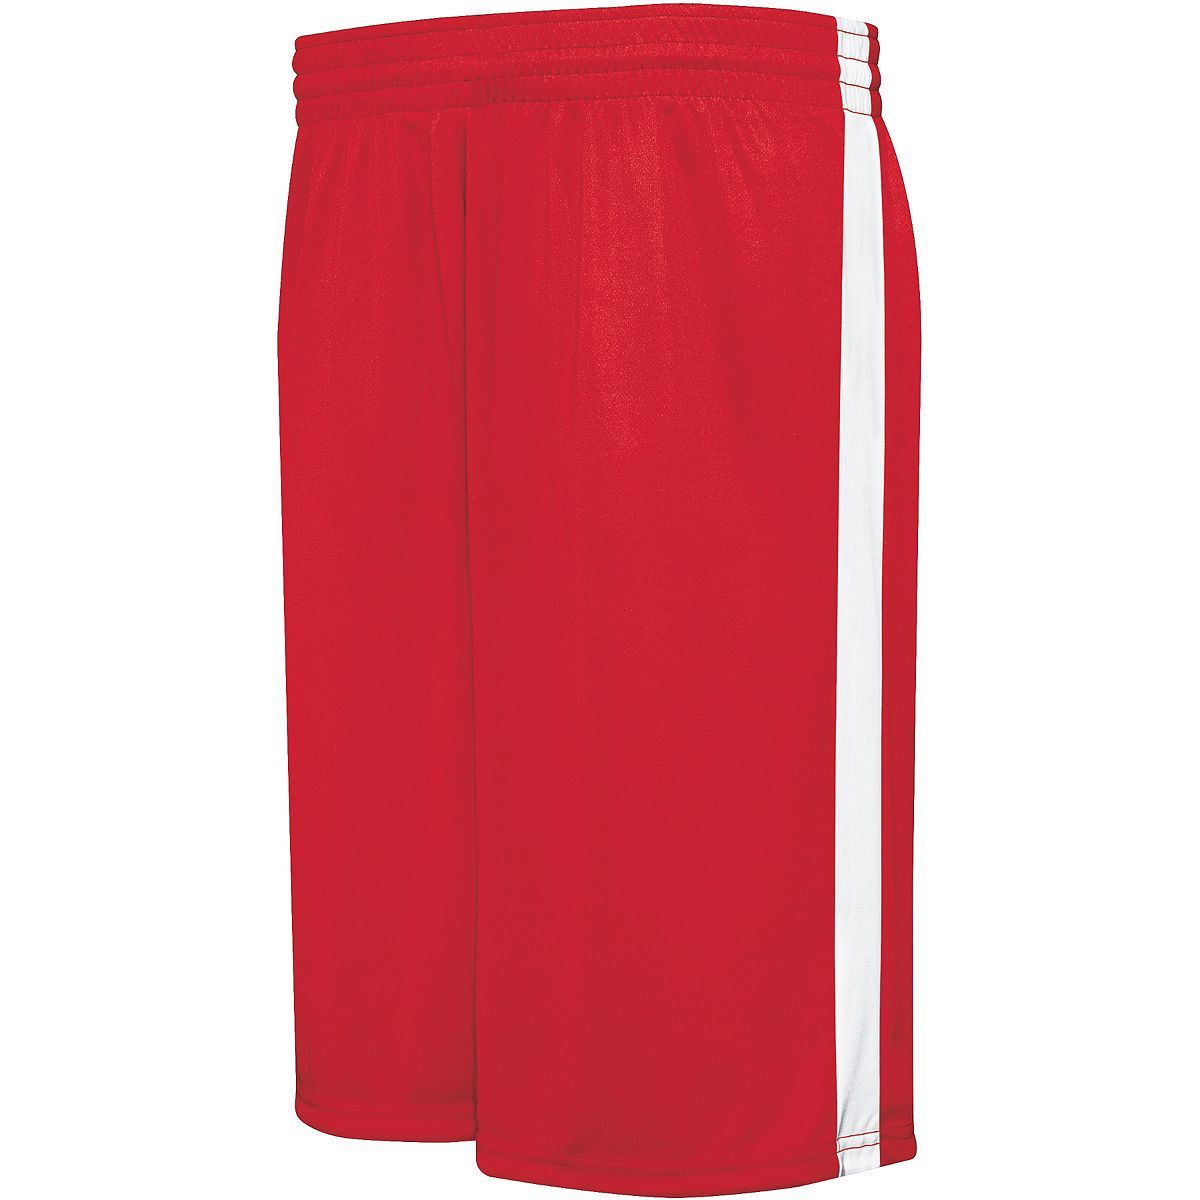 Augusta Sportswear Competition Reversible Shorts in Scarlet/White  -Part of the Adult, Adult-Shorts, Augusta-Products, Basketball, All-Sports, All-Sports-1 product lines at KanaleyCreations.com